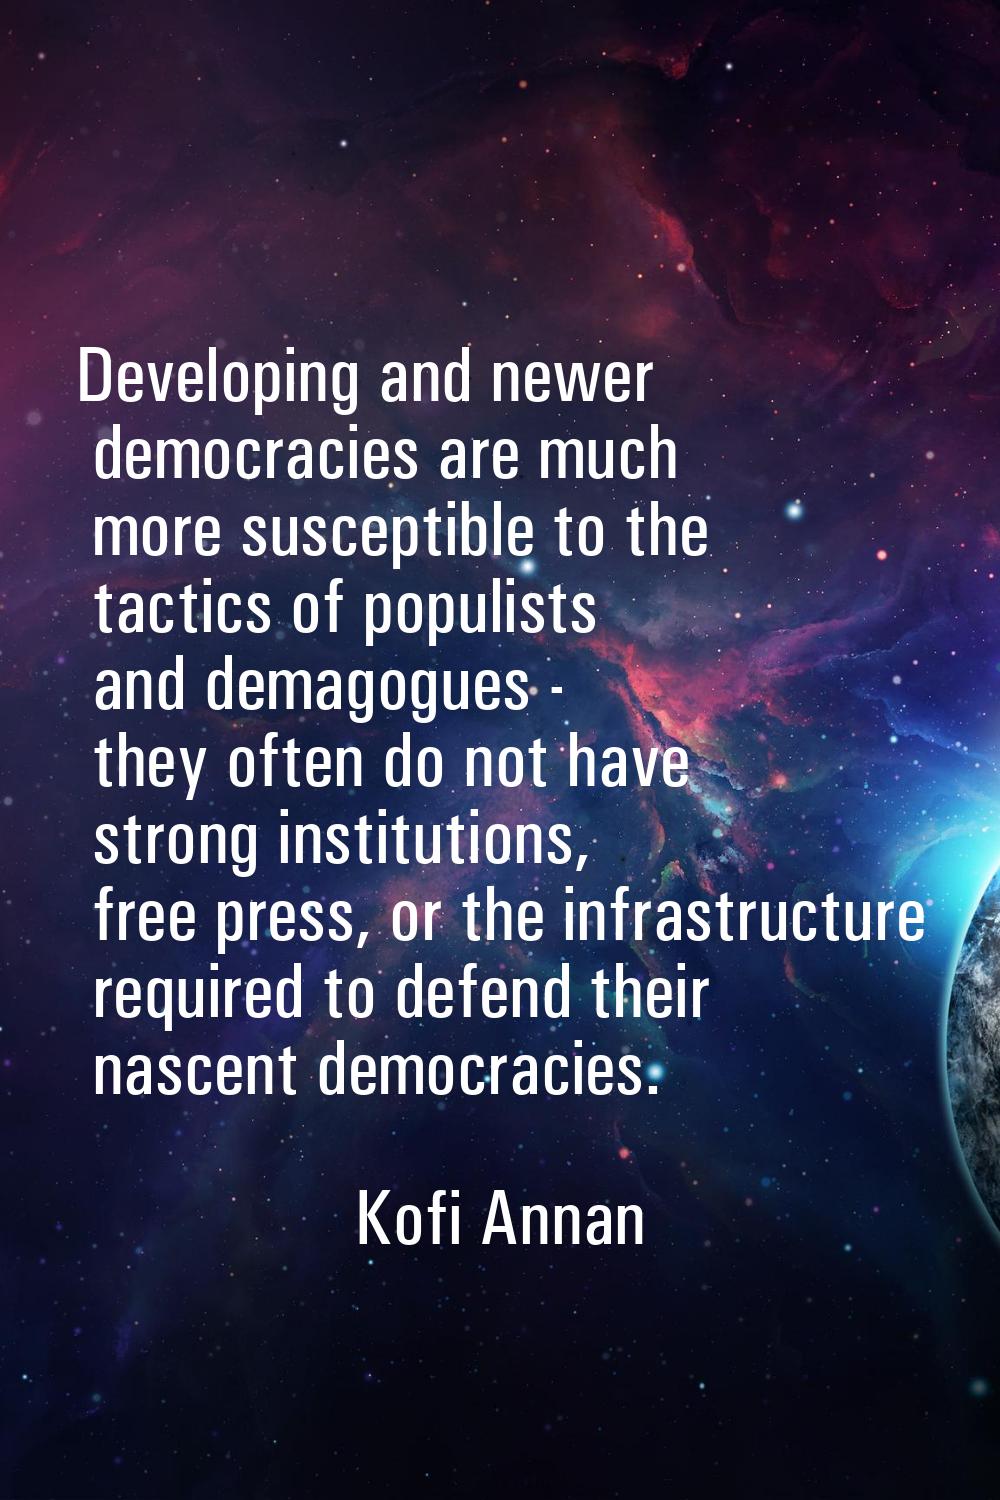 Developing and newer democracies are much more susceptible to the tactics of populists and demagogu